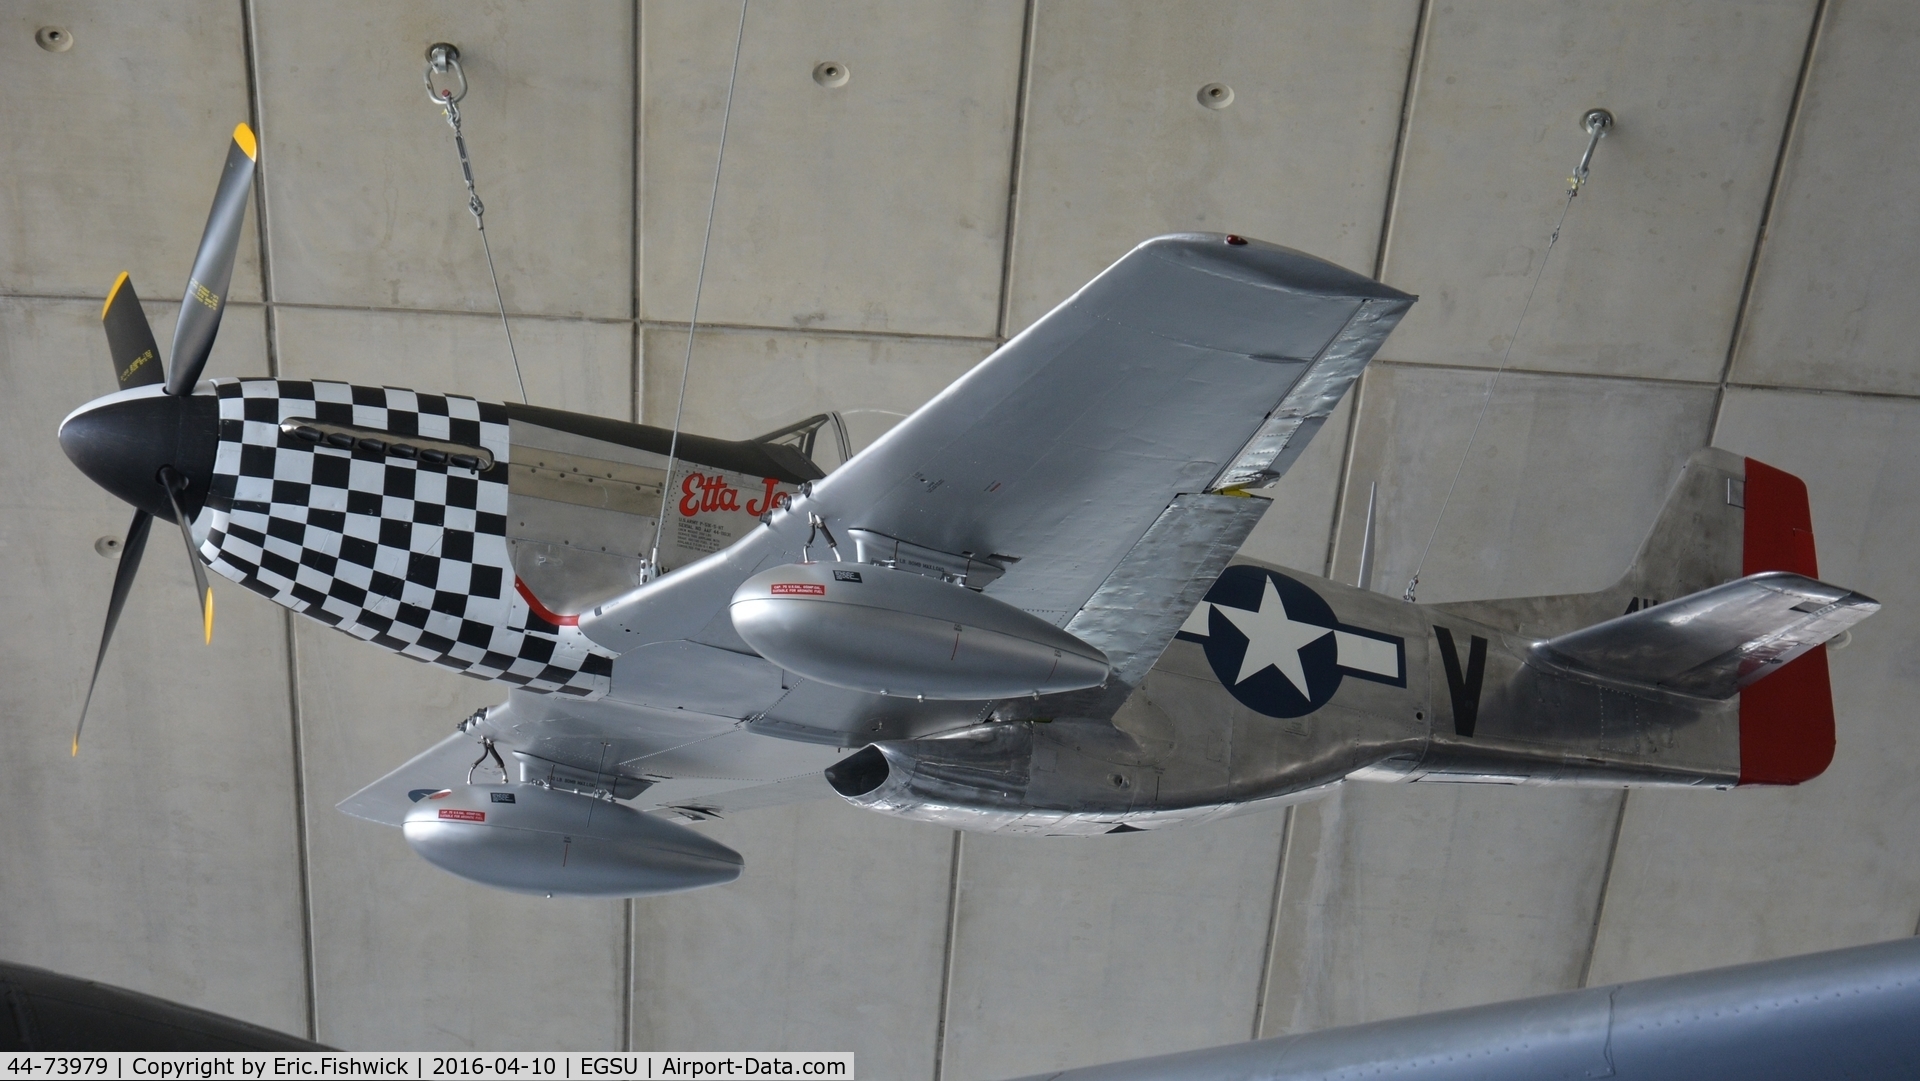 44-73979, North American P-51D Mustang C/N 122-40519, a. 'Etta Jeanne ll' in a prominent position in the American Air Museum at The Imperial War Museum, Duxford, Cambridgshire.